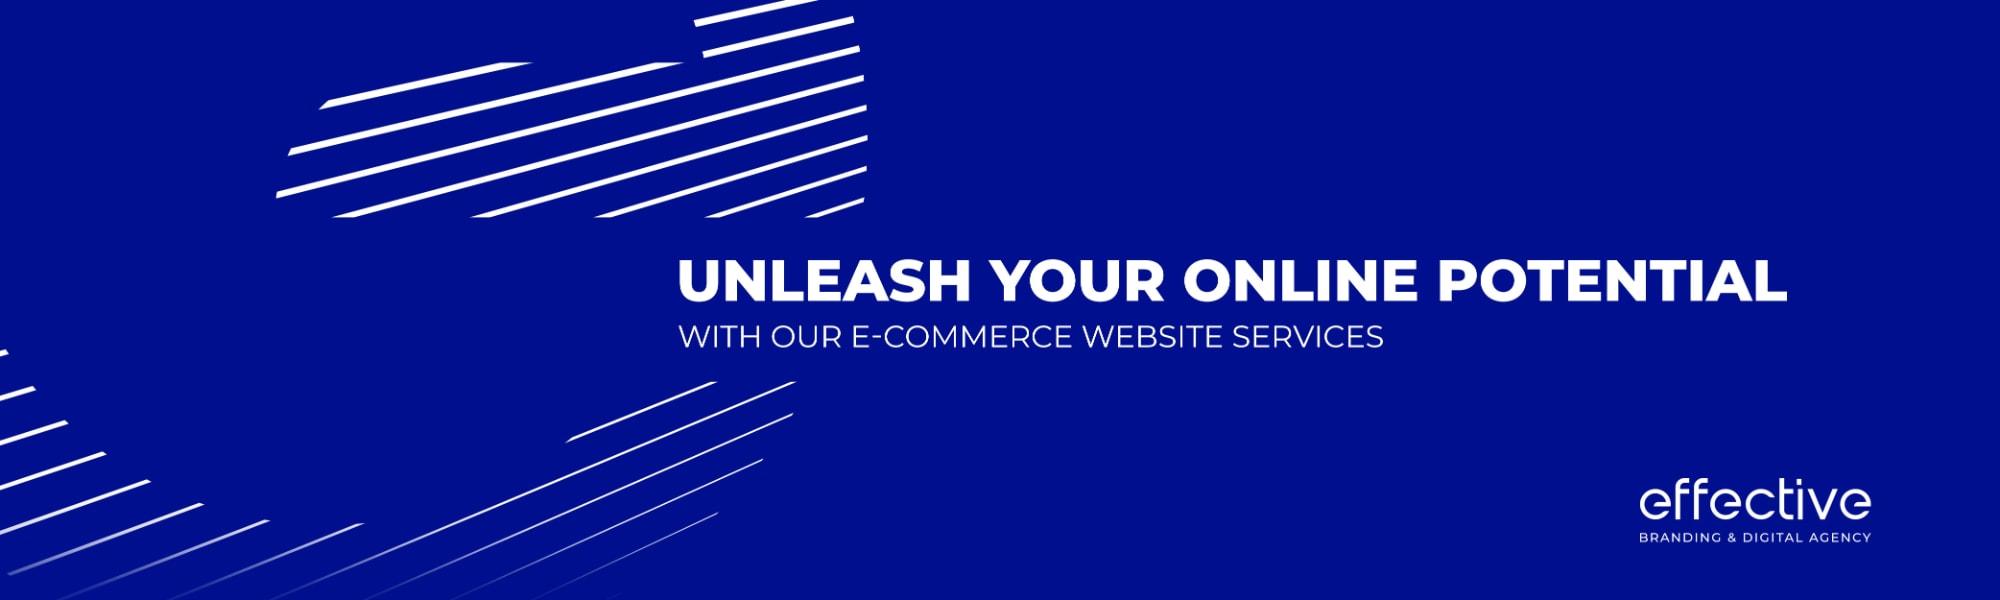 Unleash Your Online Potential with Our E Commerce Website Services